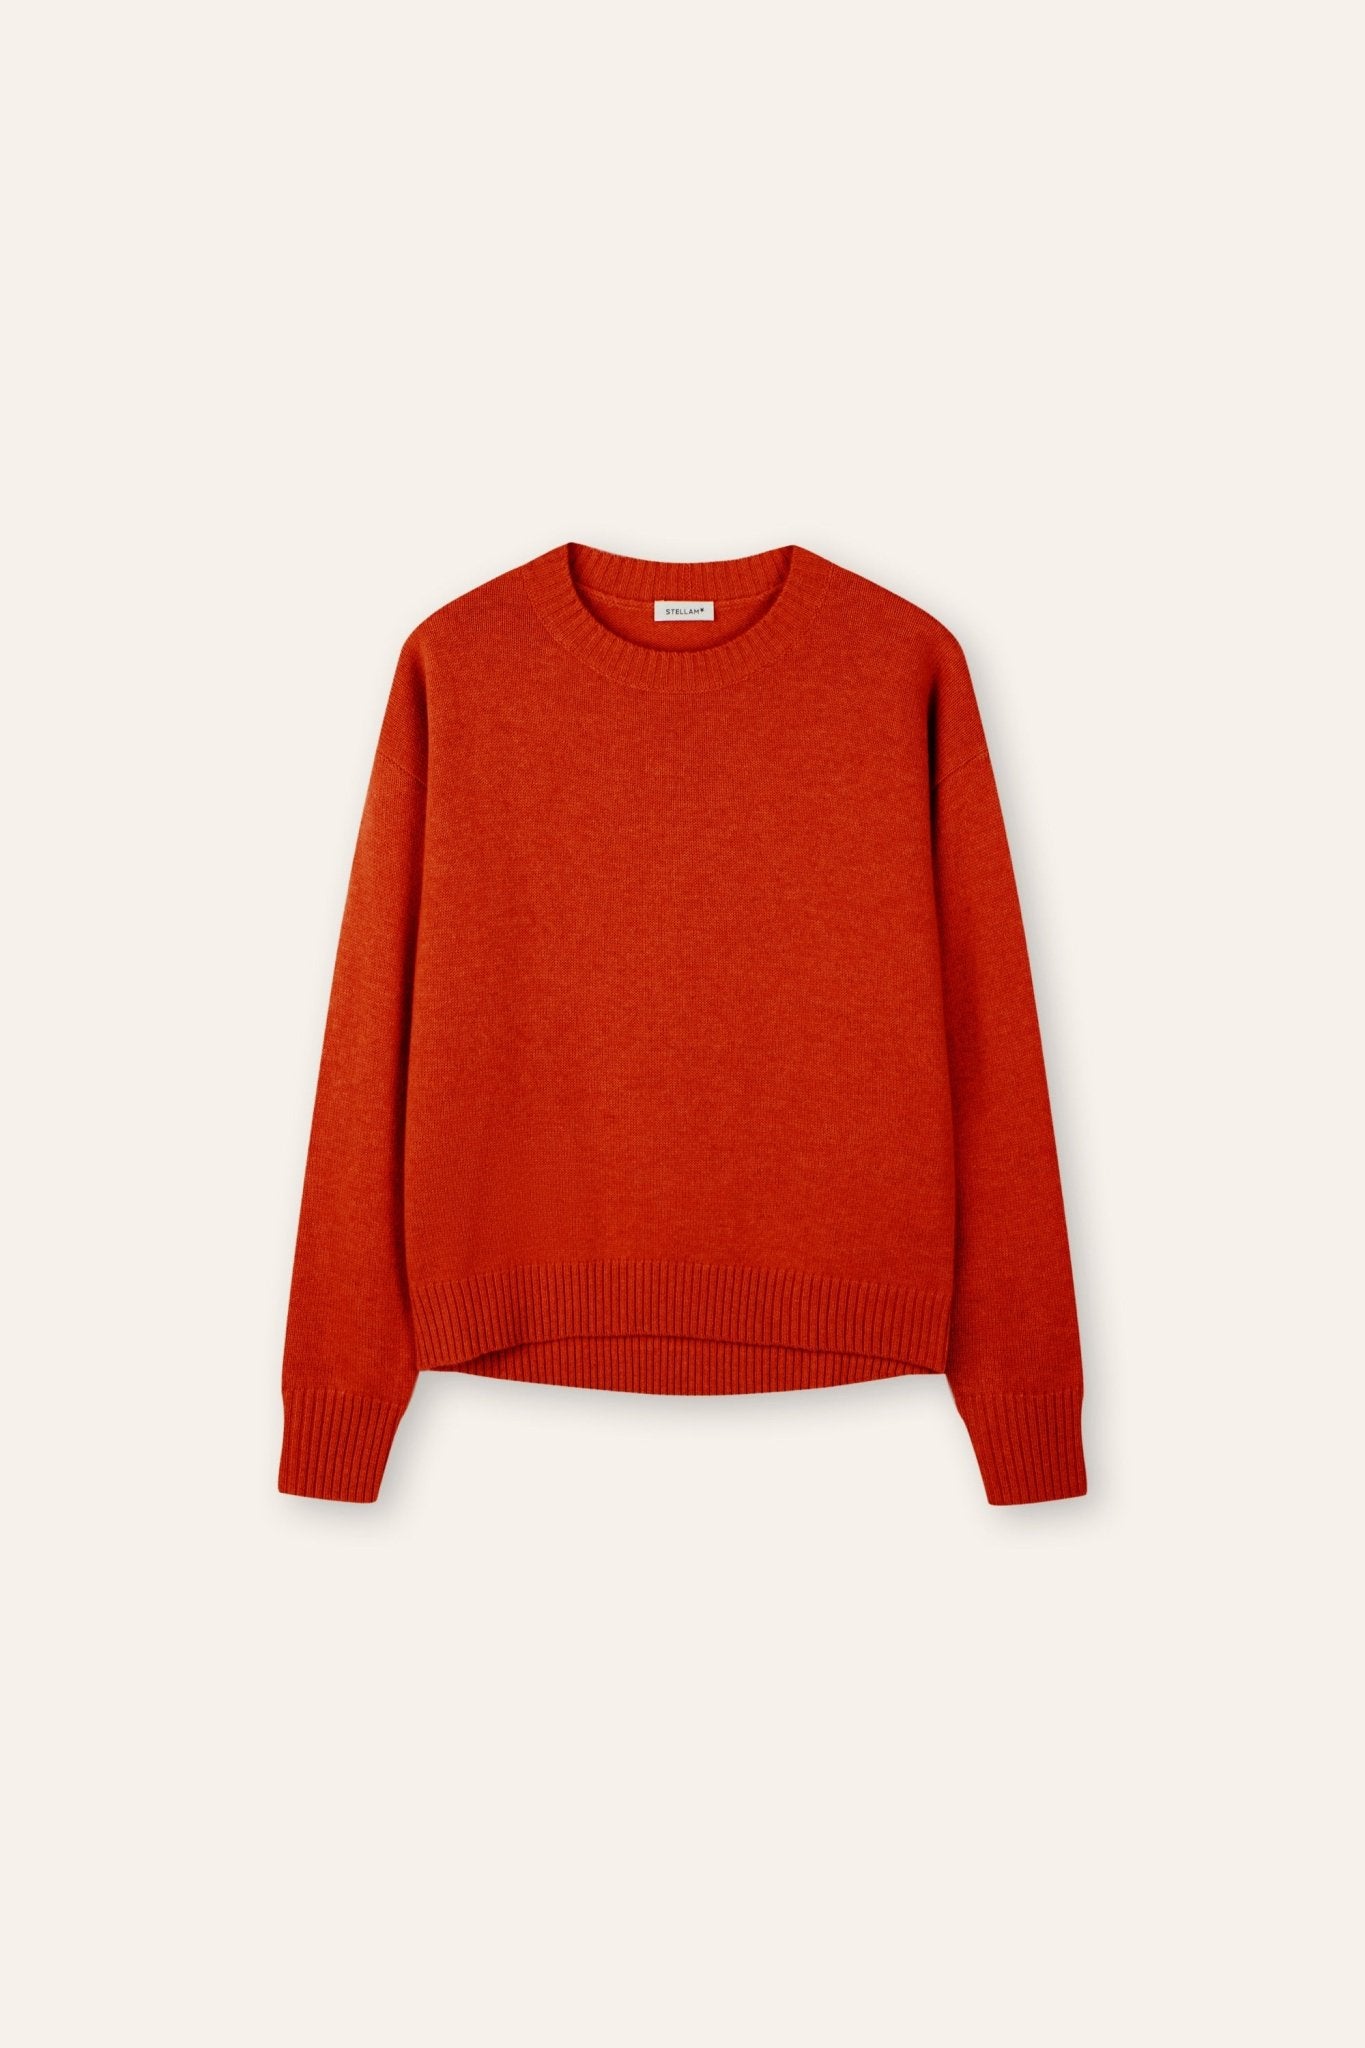 ISABEL cashmere-blended crew neck sweater (Red) - STELLAM